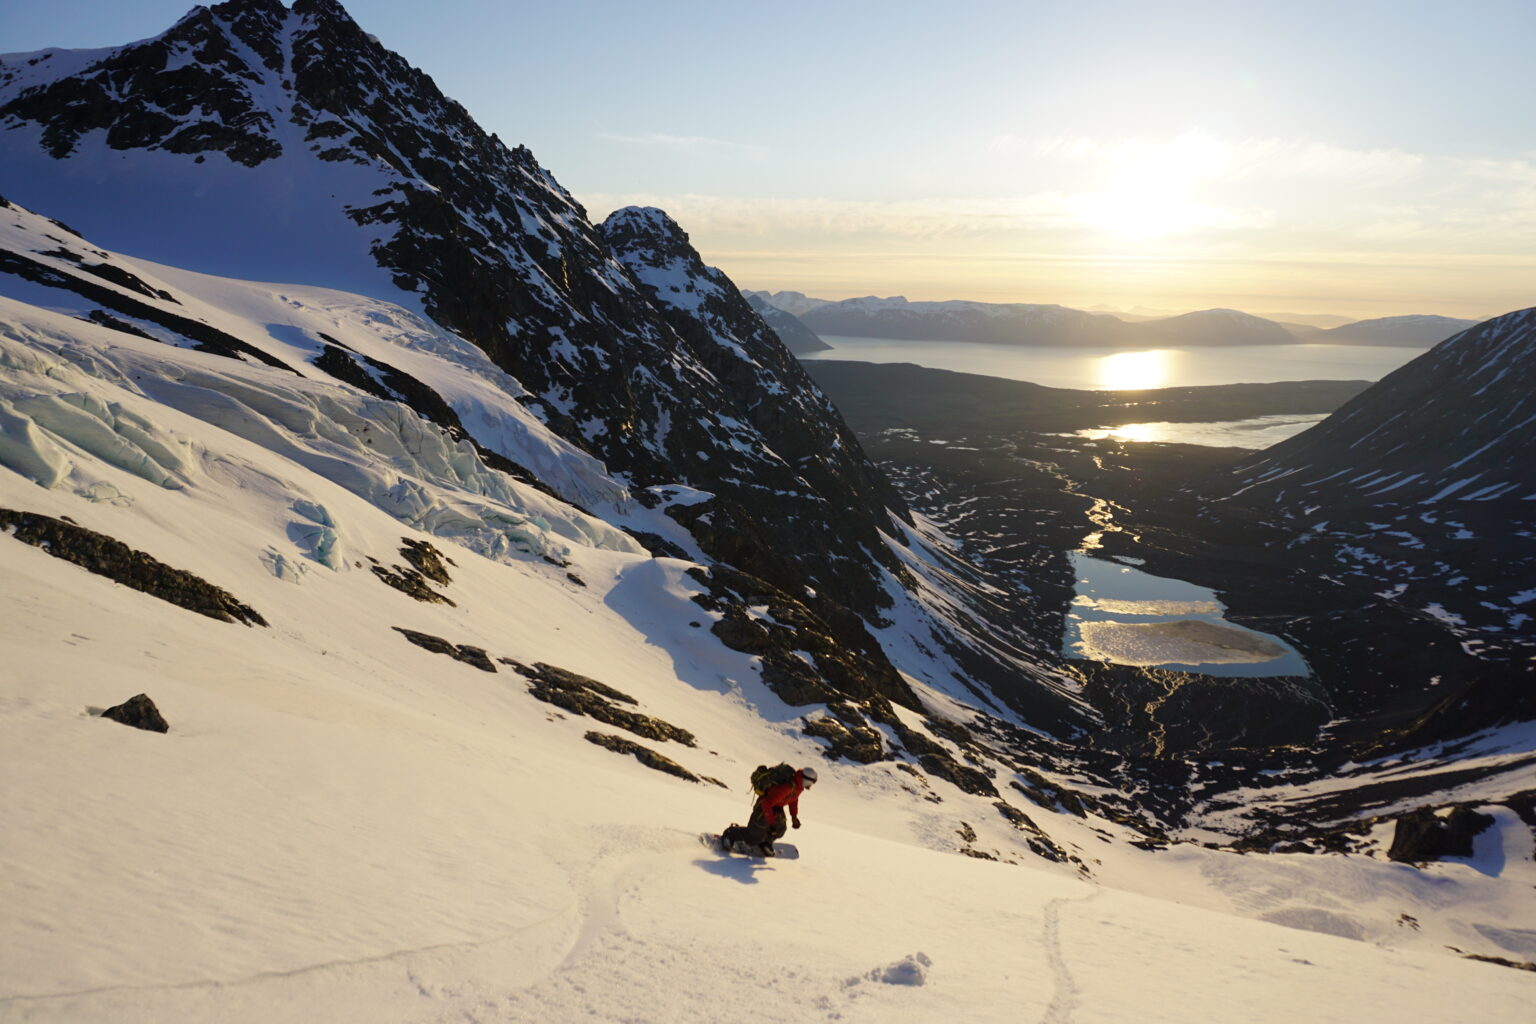 Snowboarding down the the Lenangsbreen Glacier in the Lyngen Alps of Norway with the Midnight sun in the background